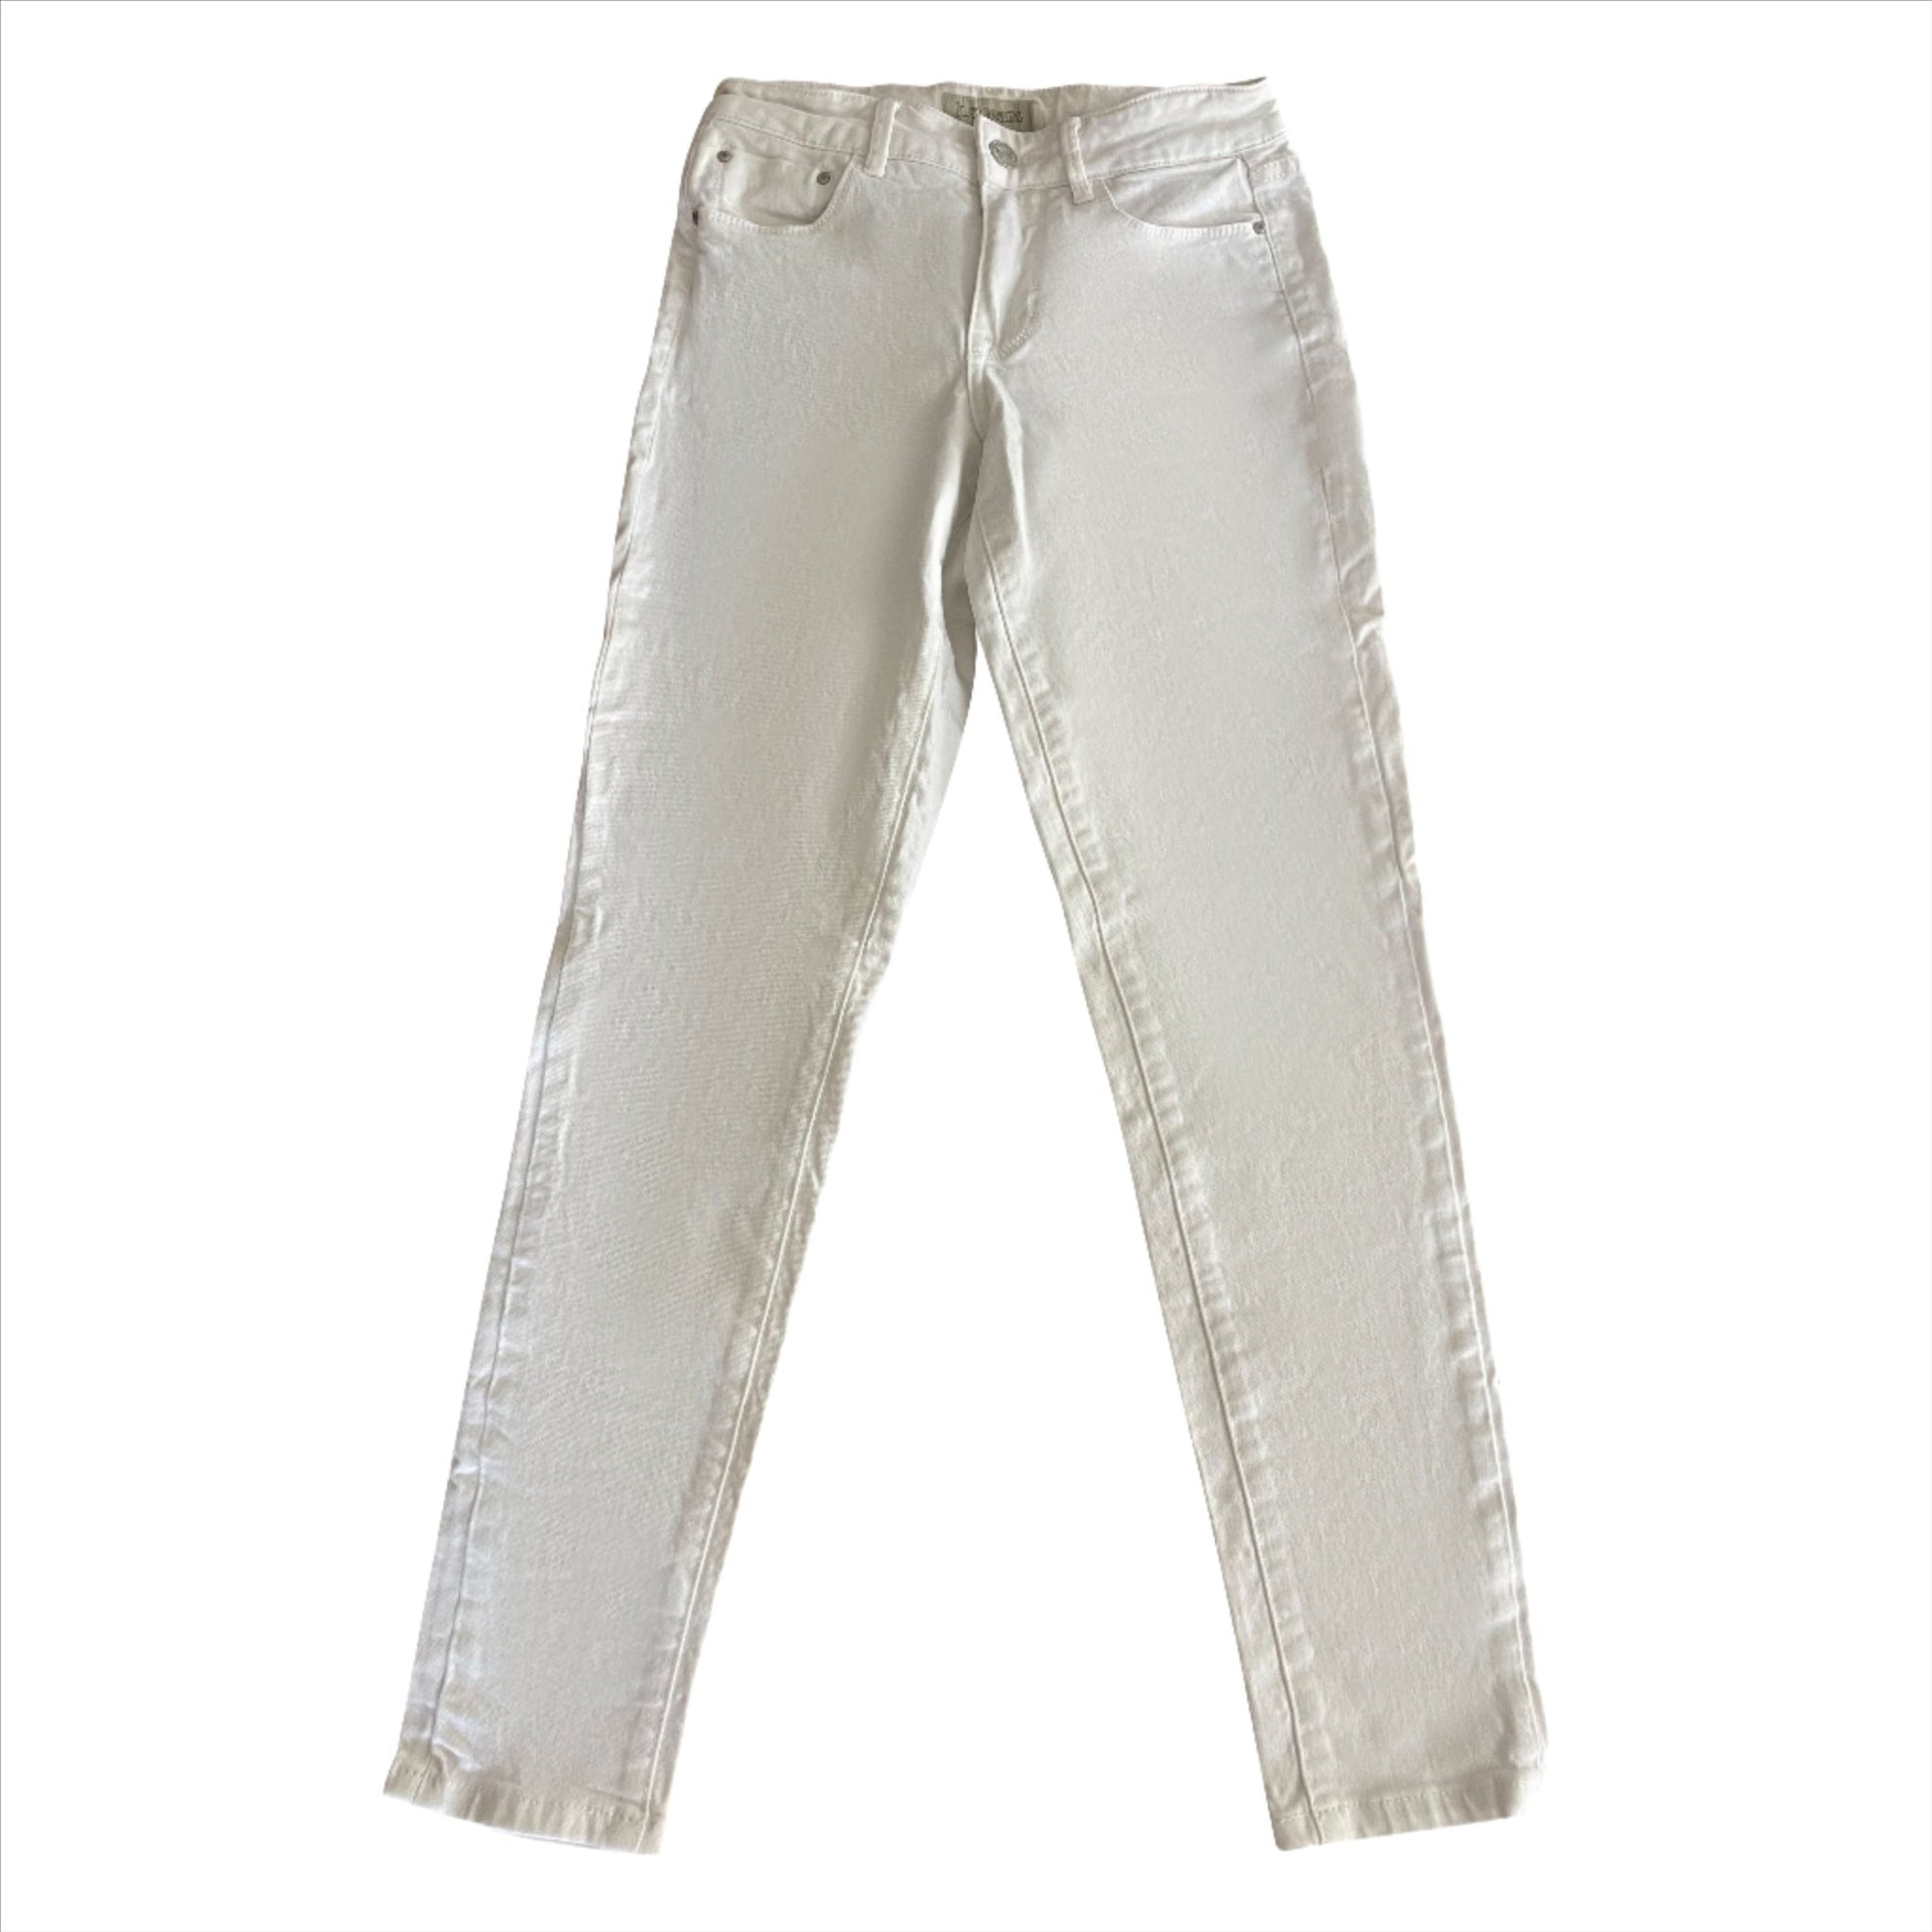 Just Jeans white skinny jeans | size 6